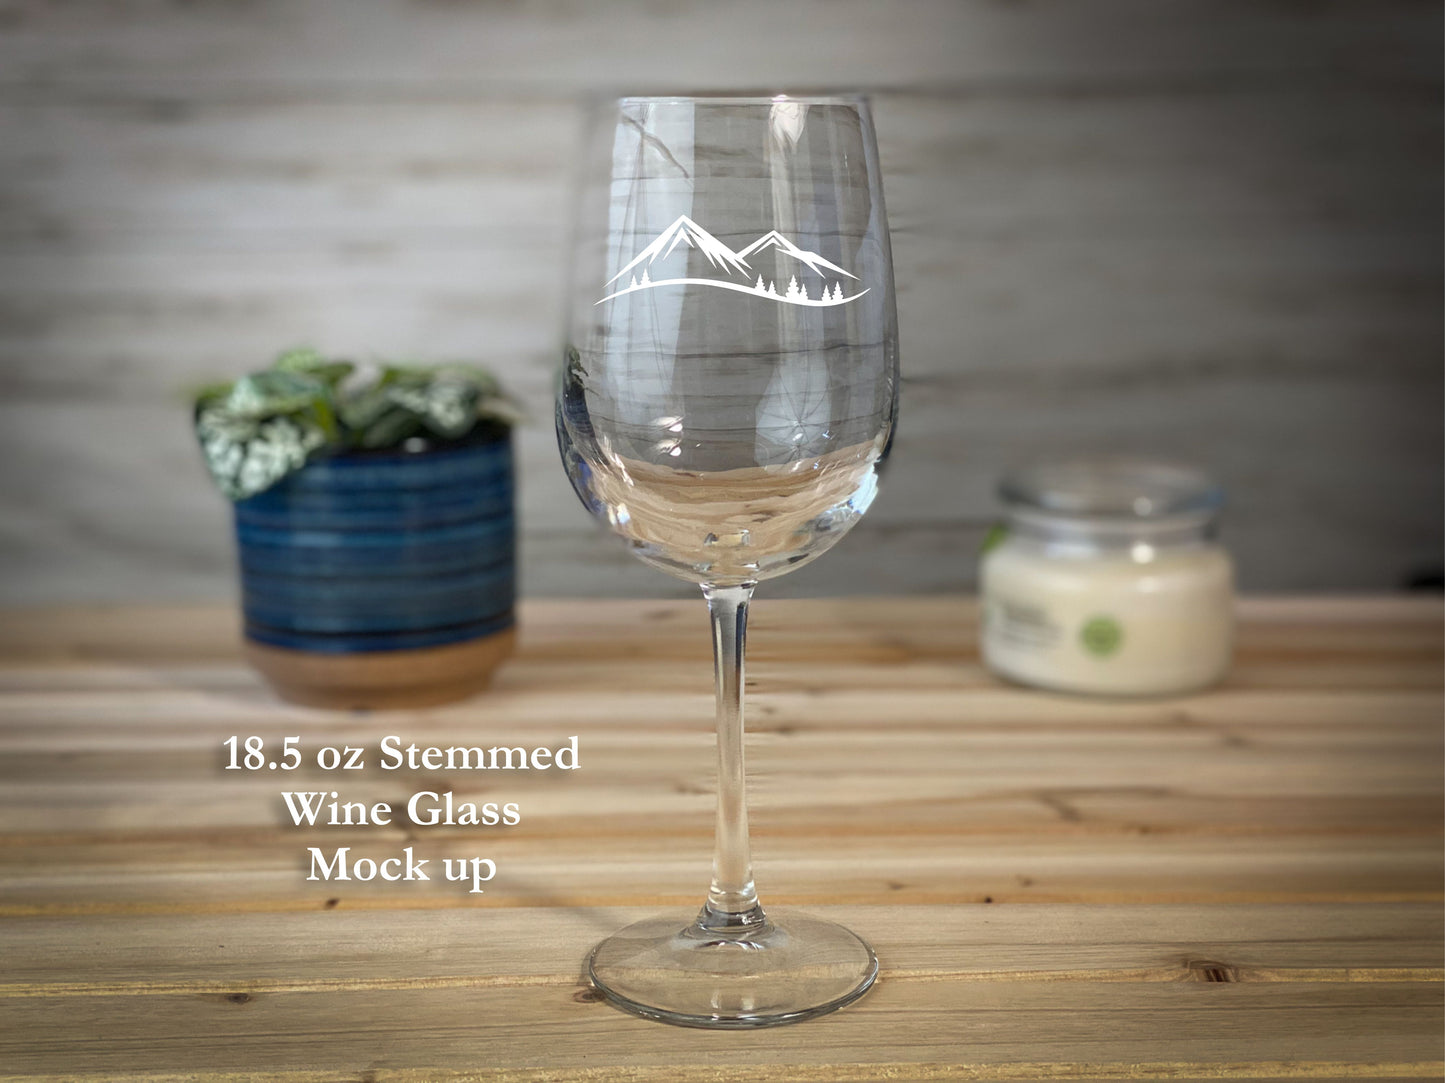 Trees and Mountain Scnene - 18.5 oz Stemmed Wine Glass